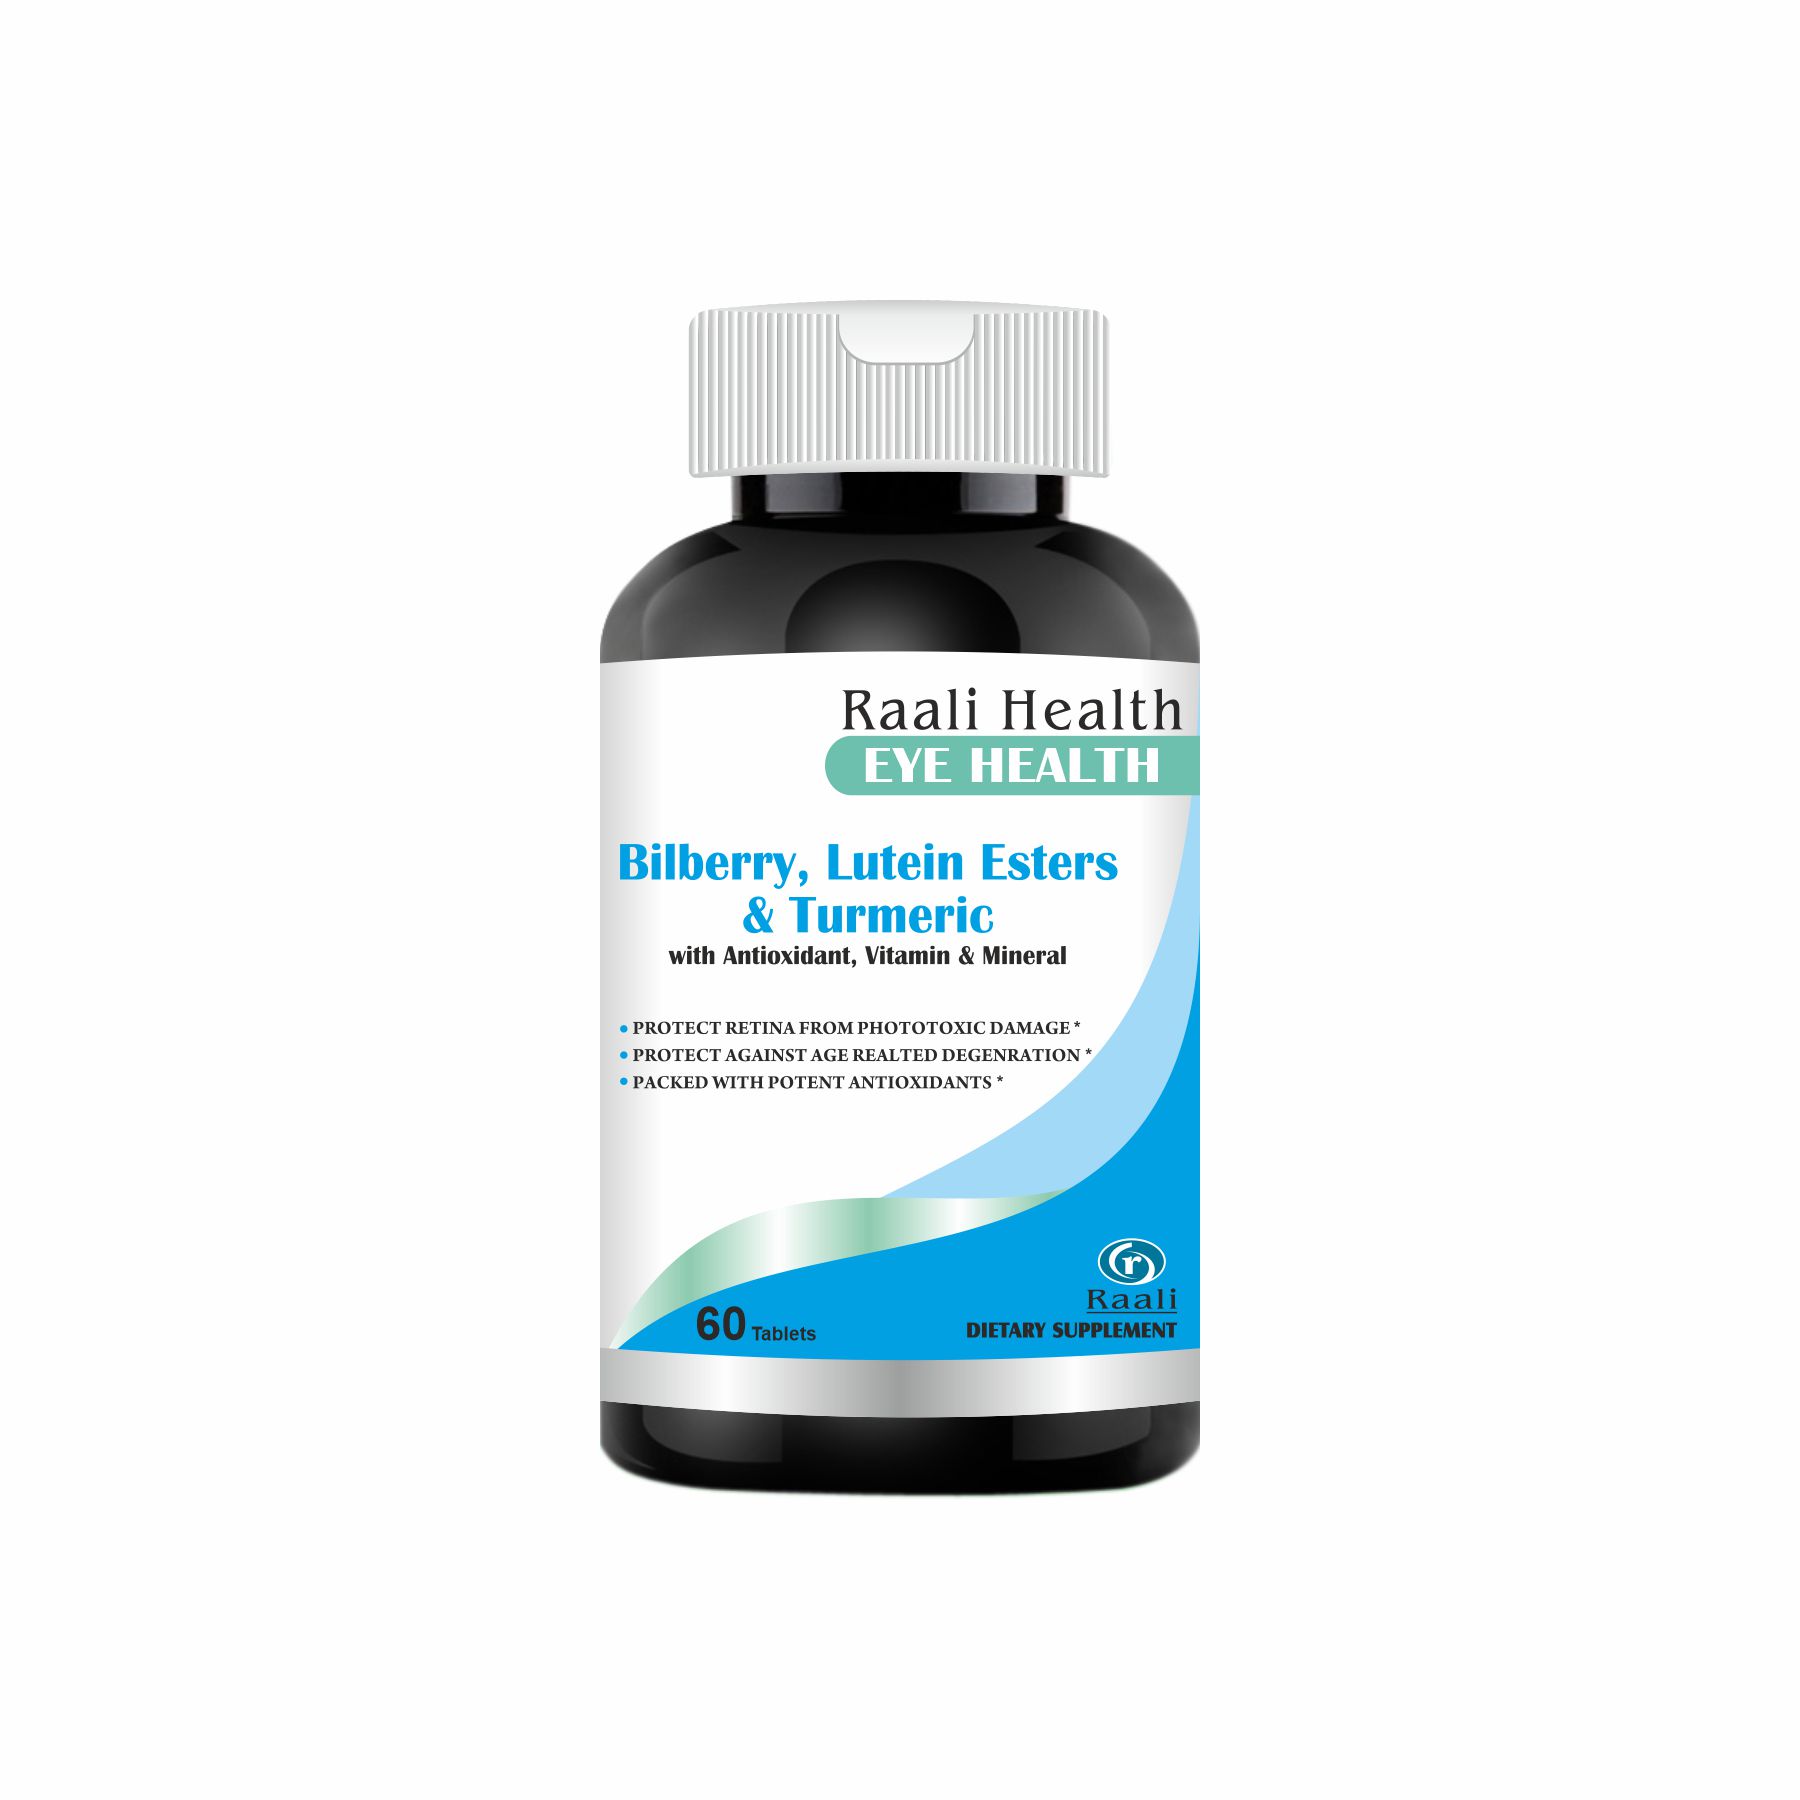 Bilberry, Lutein, Esters & Turmeric, antioxidant, vitamin, minerals, eye health, protect age related eye health issueBilberry, Lutein, Esters & Turmeric, antioxidant, vitamin, minerals, eye health, protect age related eye health issue